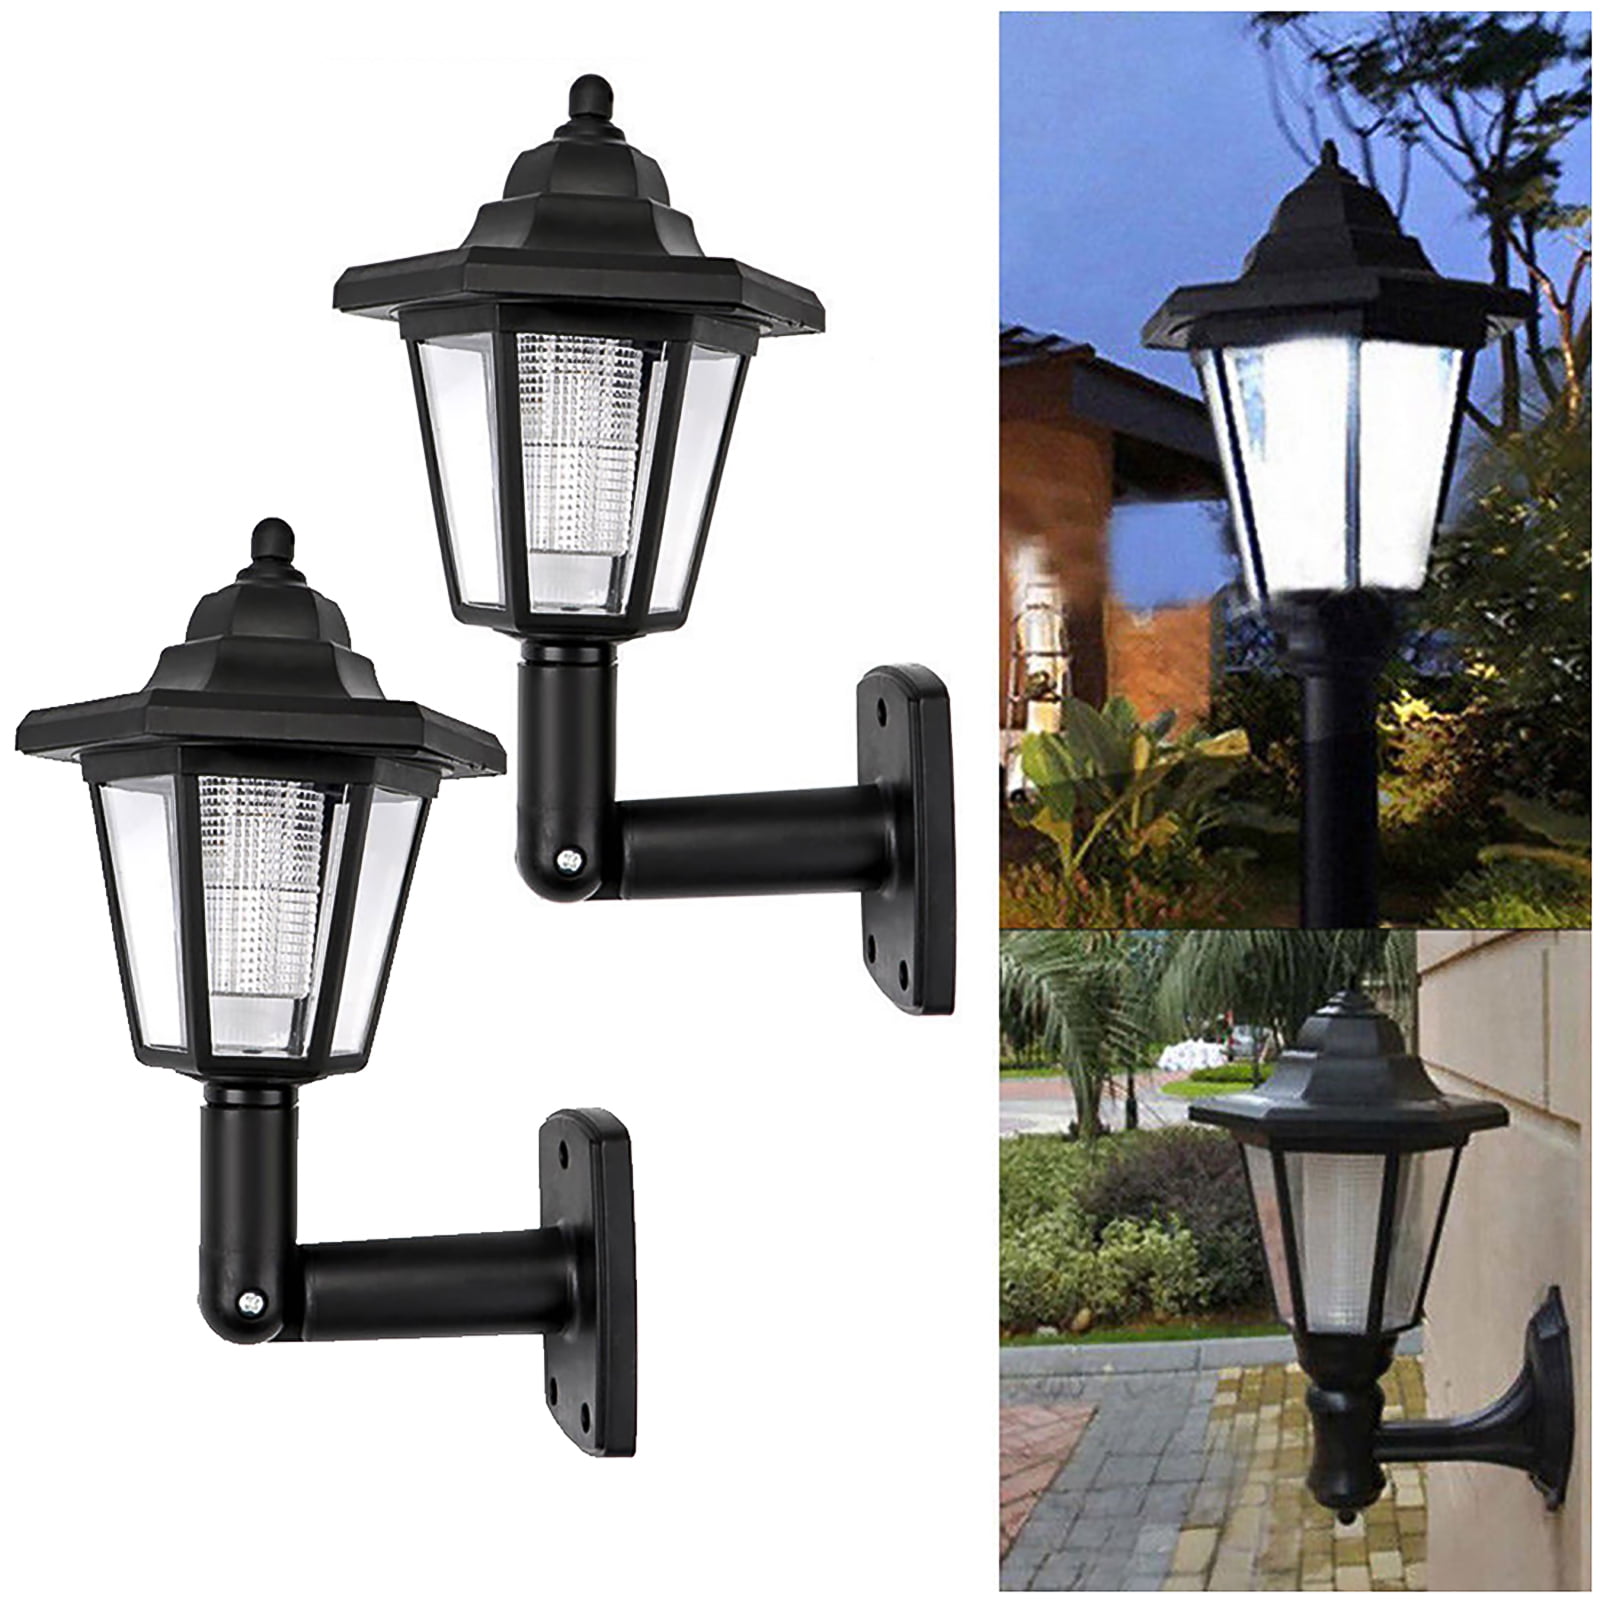 Details about   Home Garden Solar Lamps LED Wall Lights Waterproof Mono-Crystal Silicon Panel 2V 